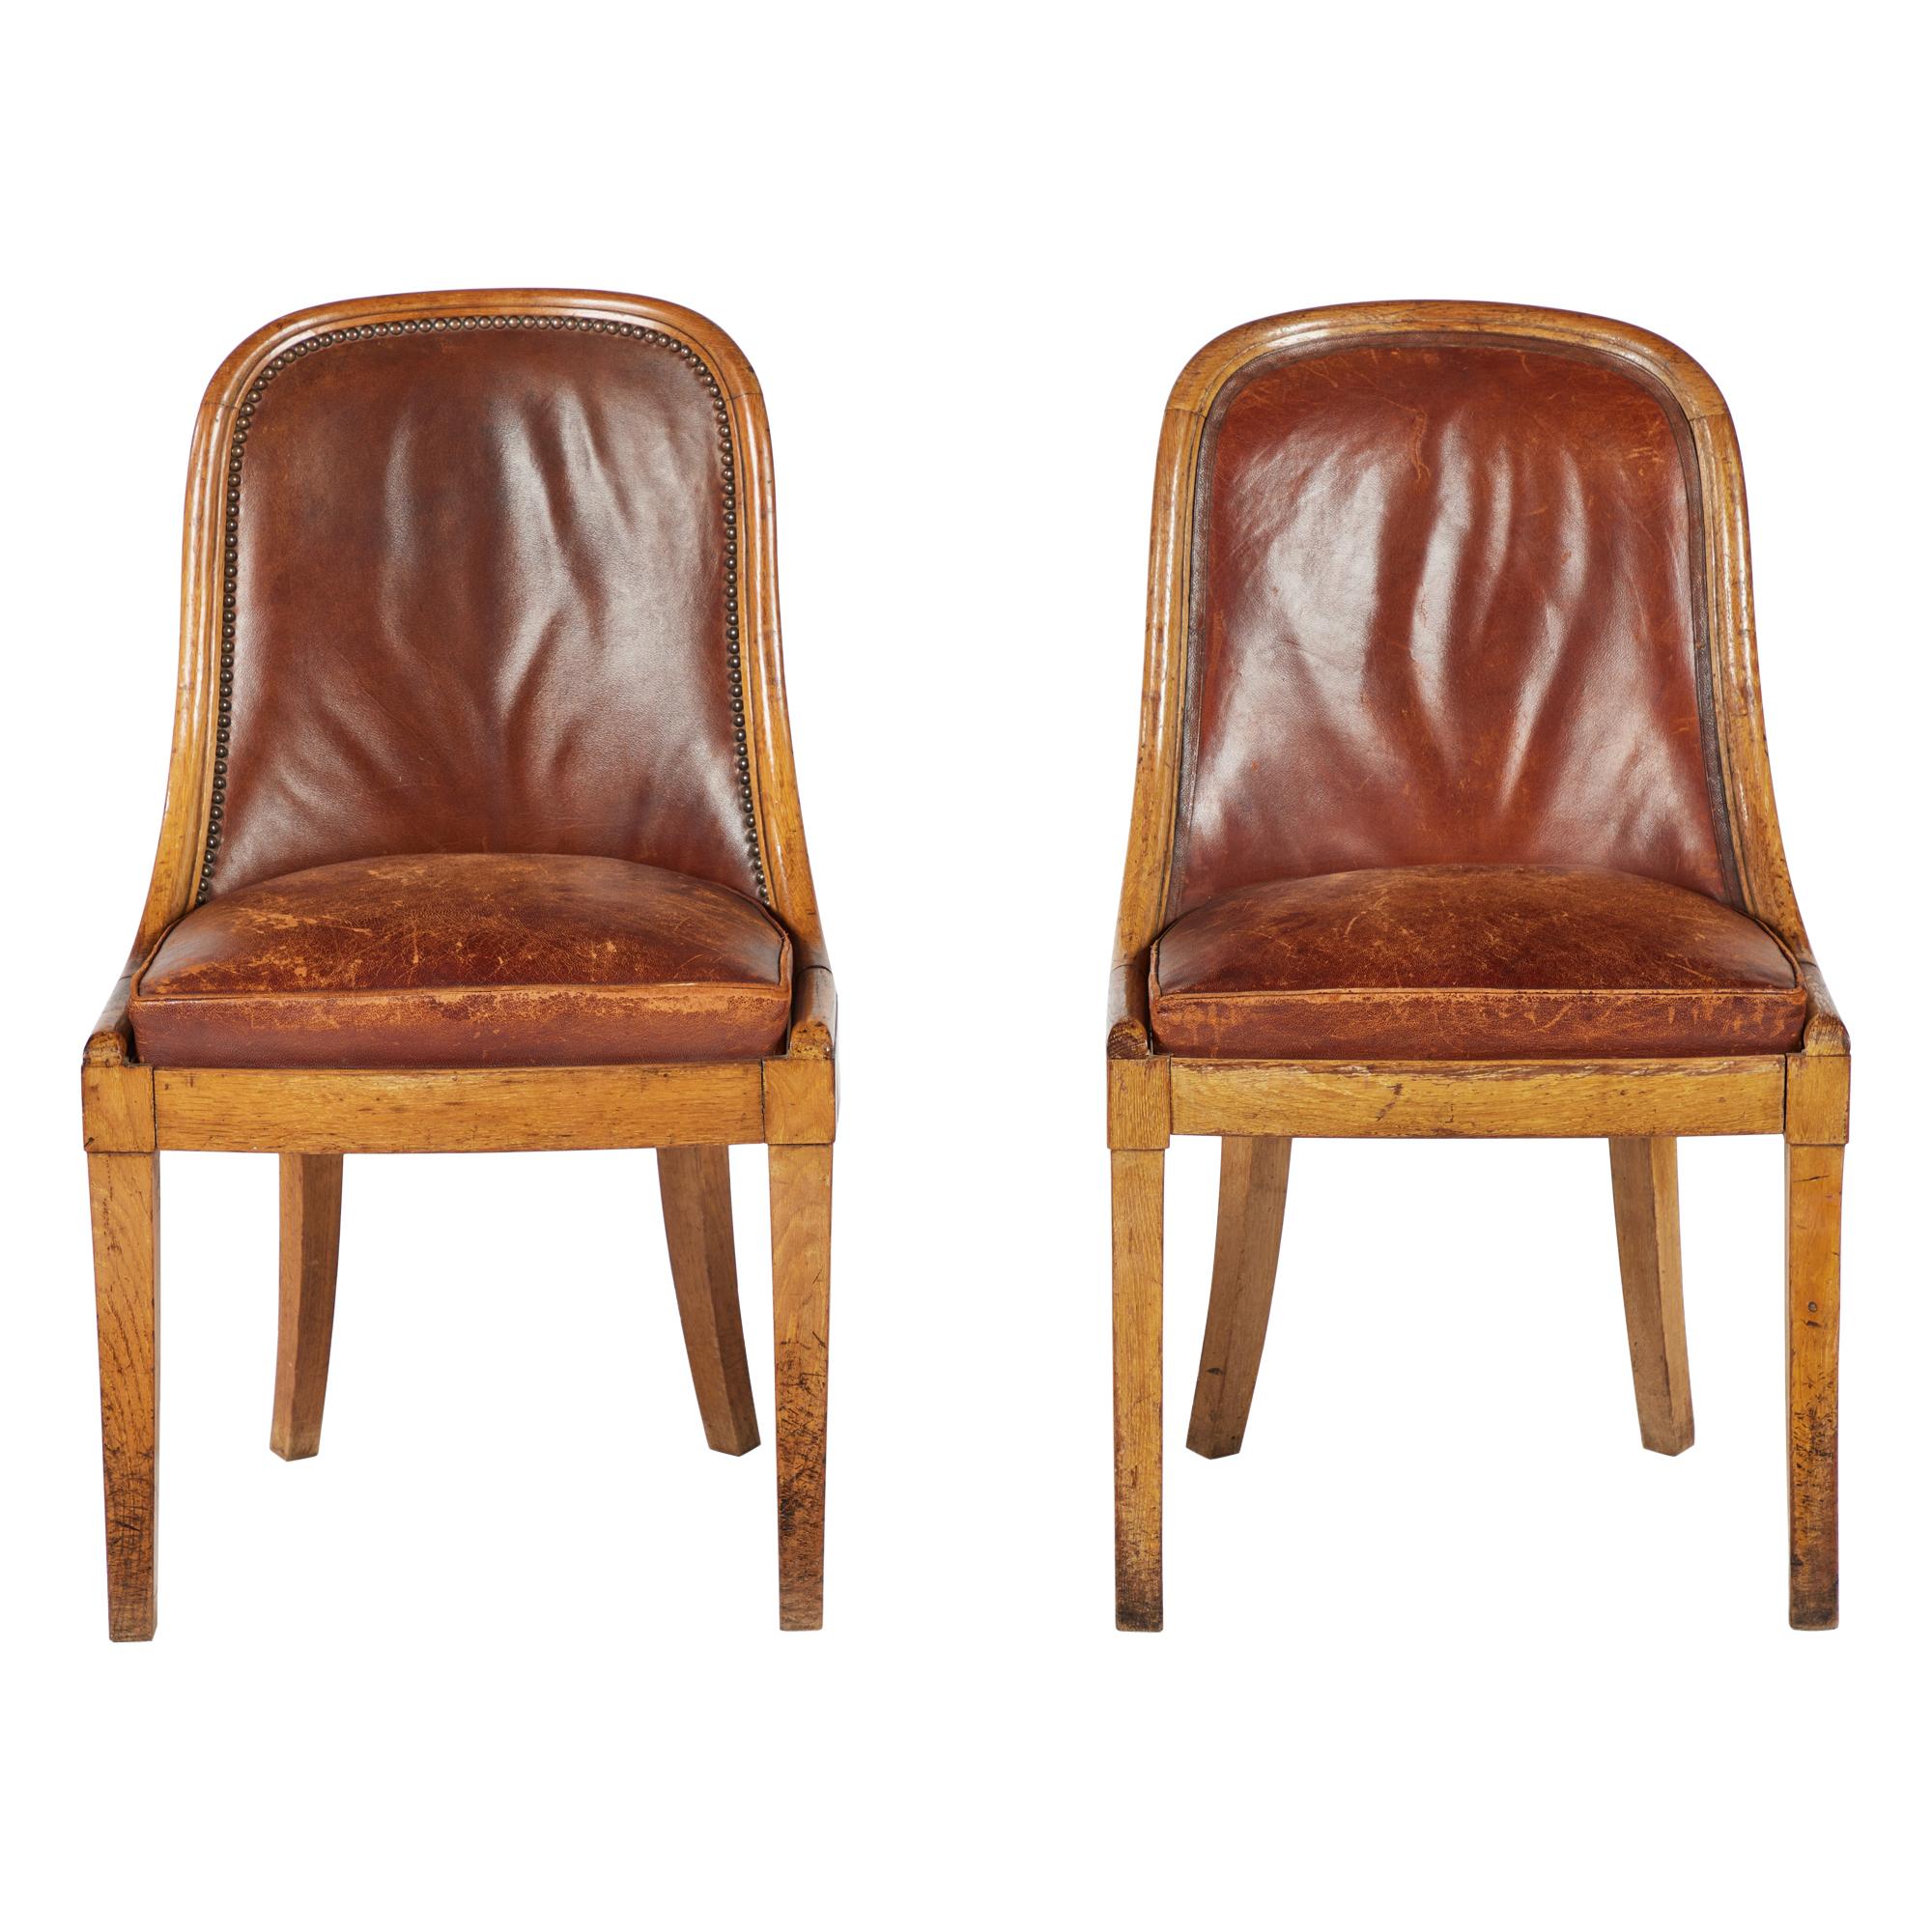 Pair of Midcentury French Oak and Leather Side Chairs